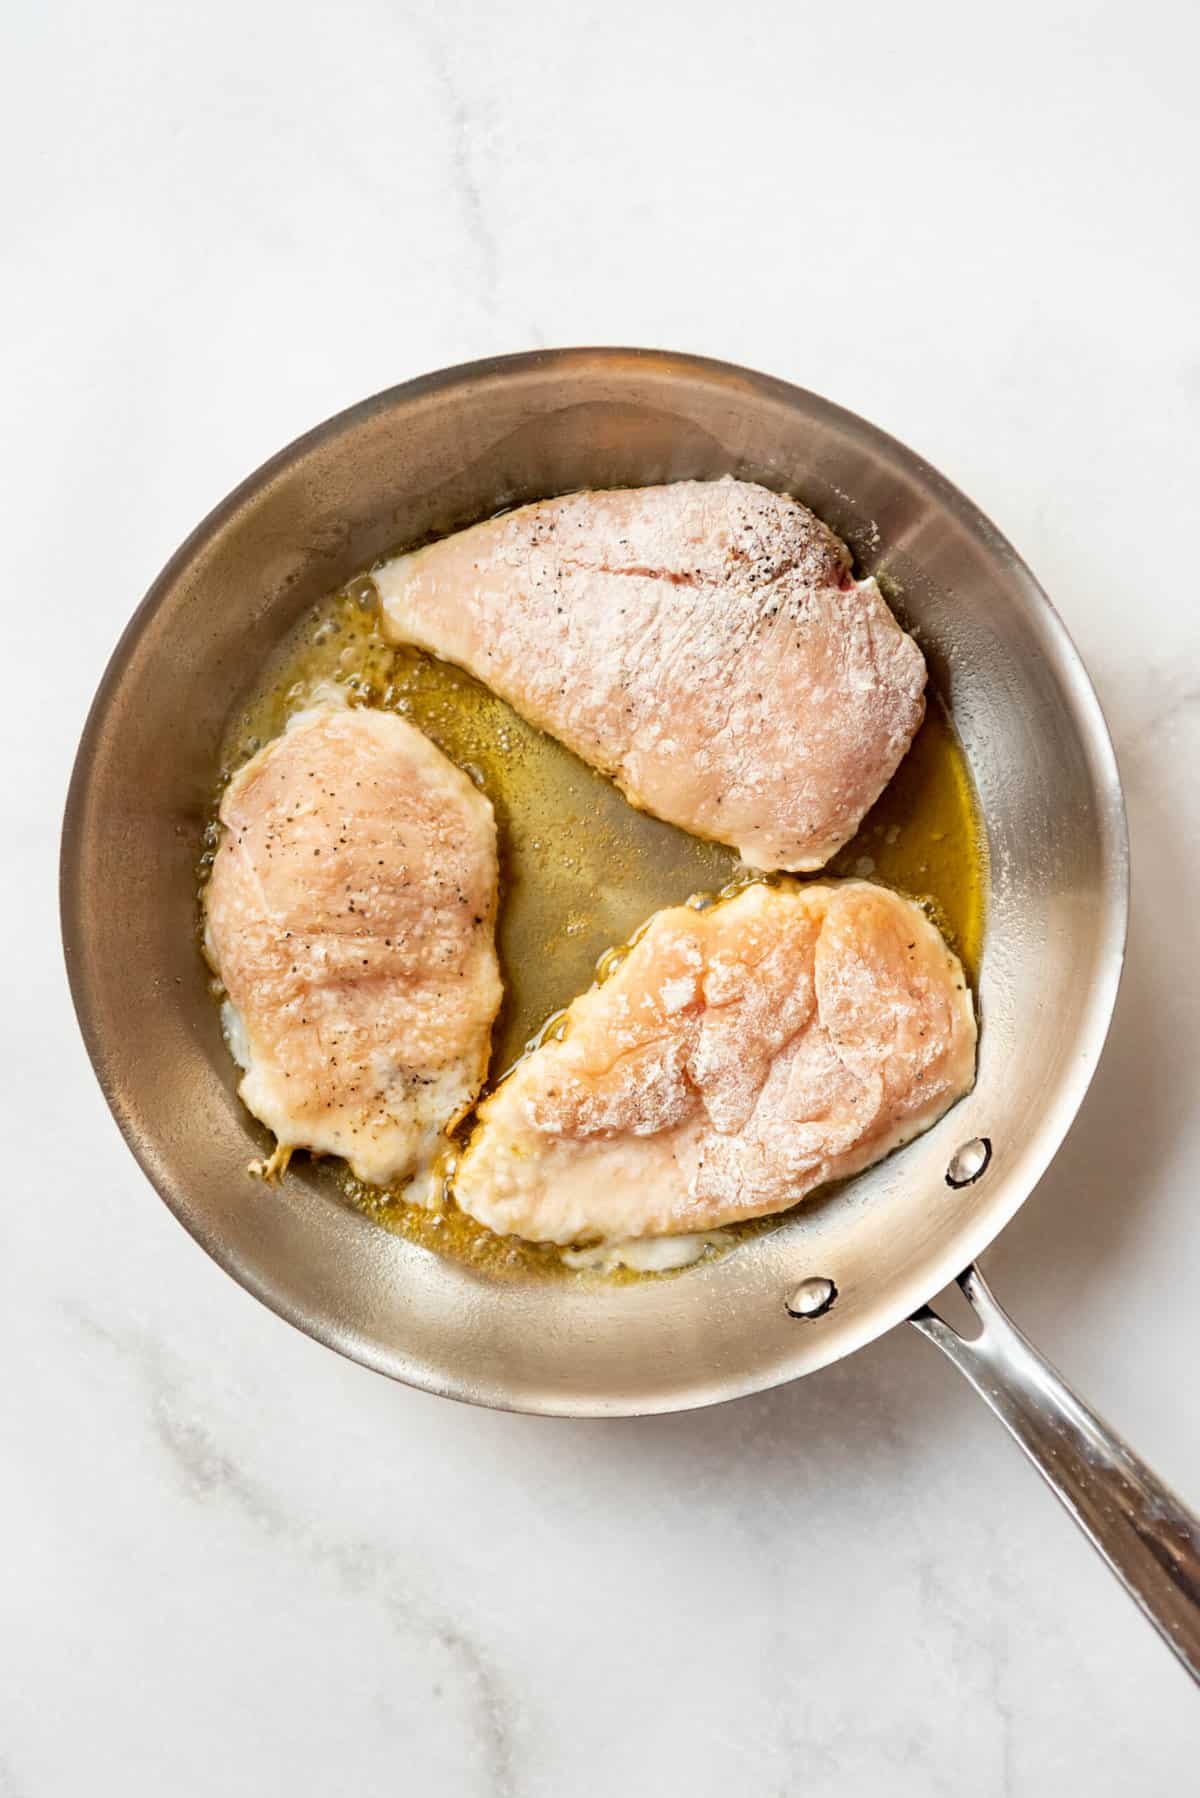 Searing chicken breasts in oil in a pan.